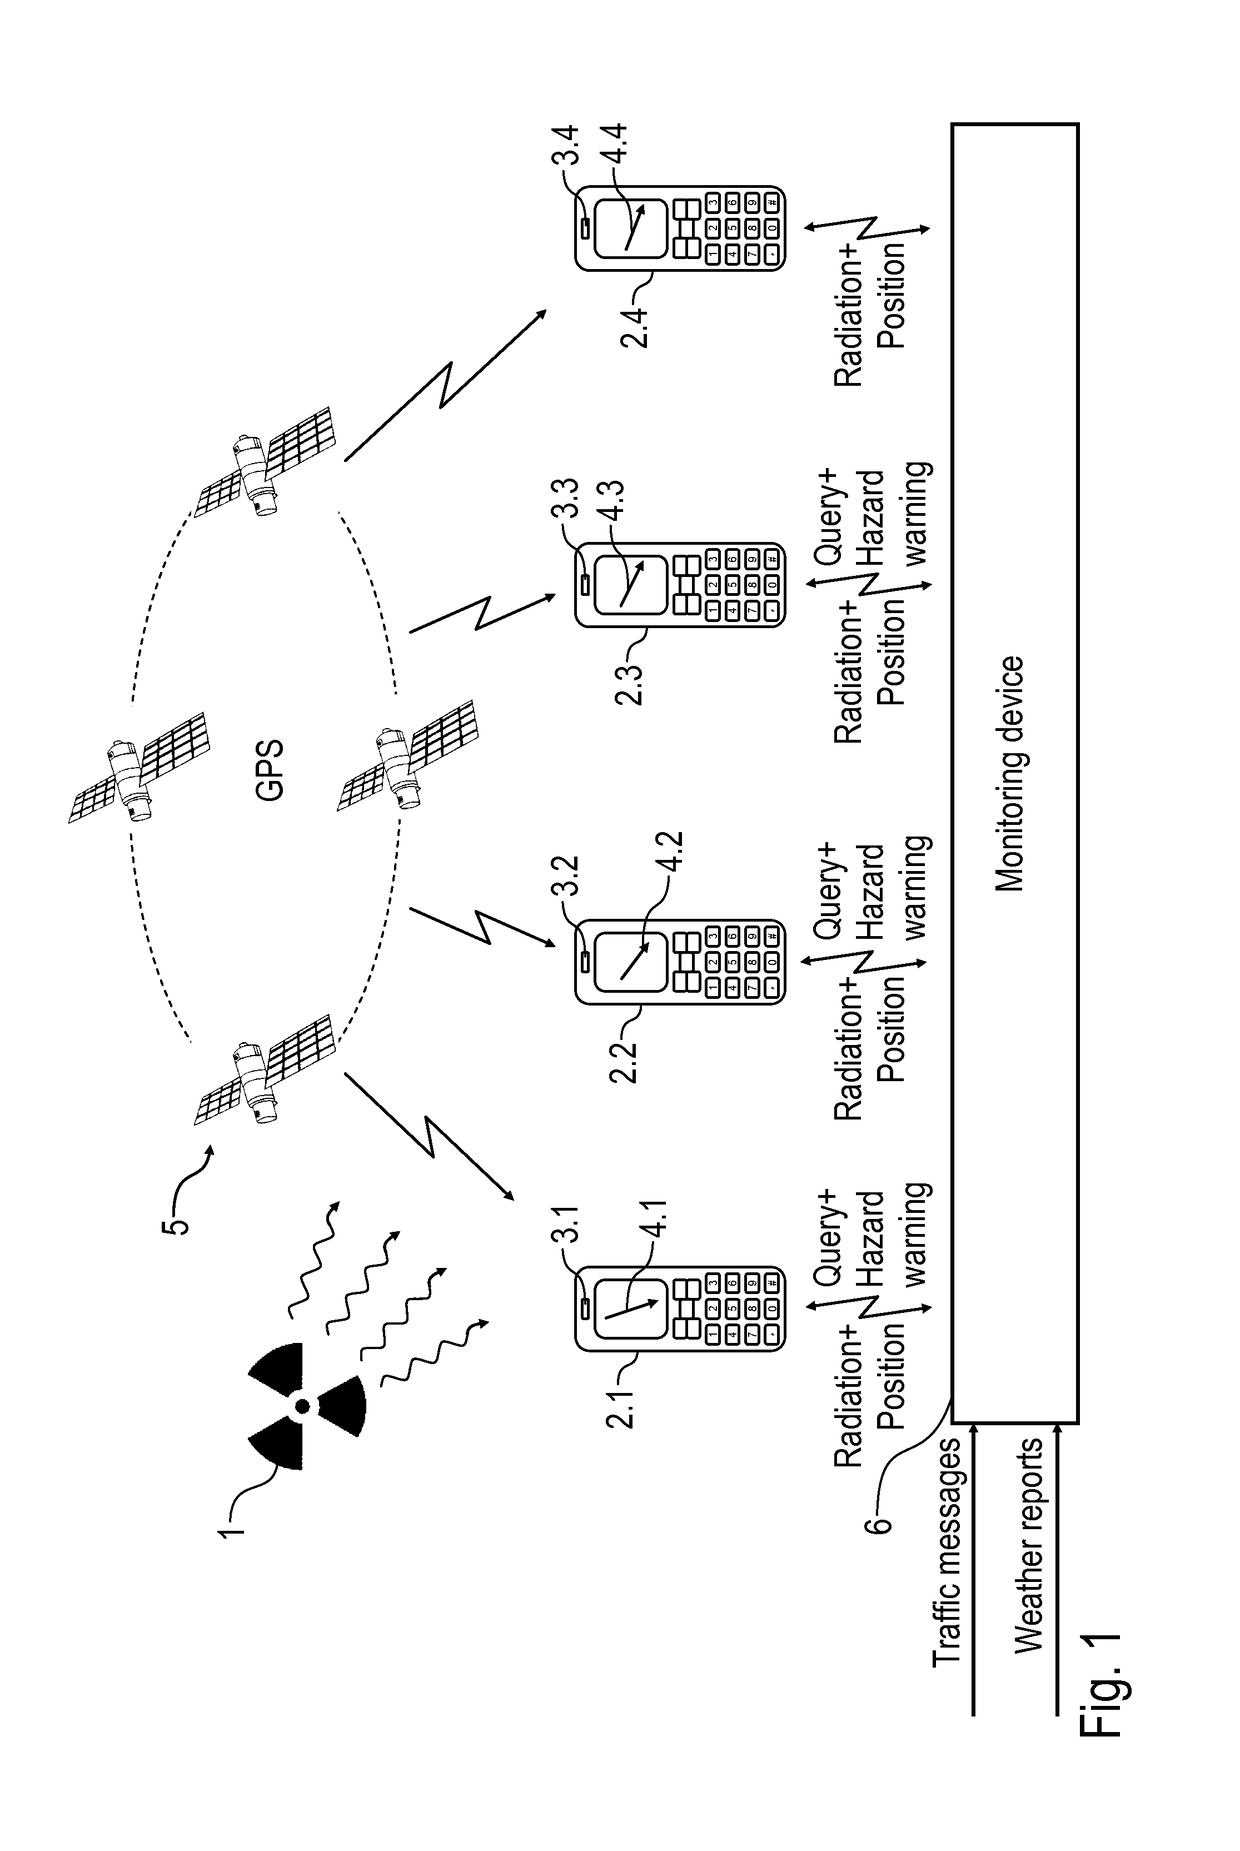 Monitoring device, terminal, and monitoring system for monitoring the environment